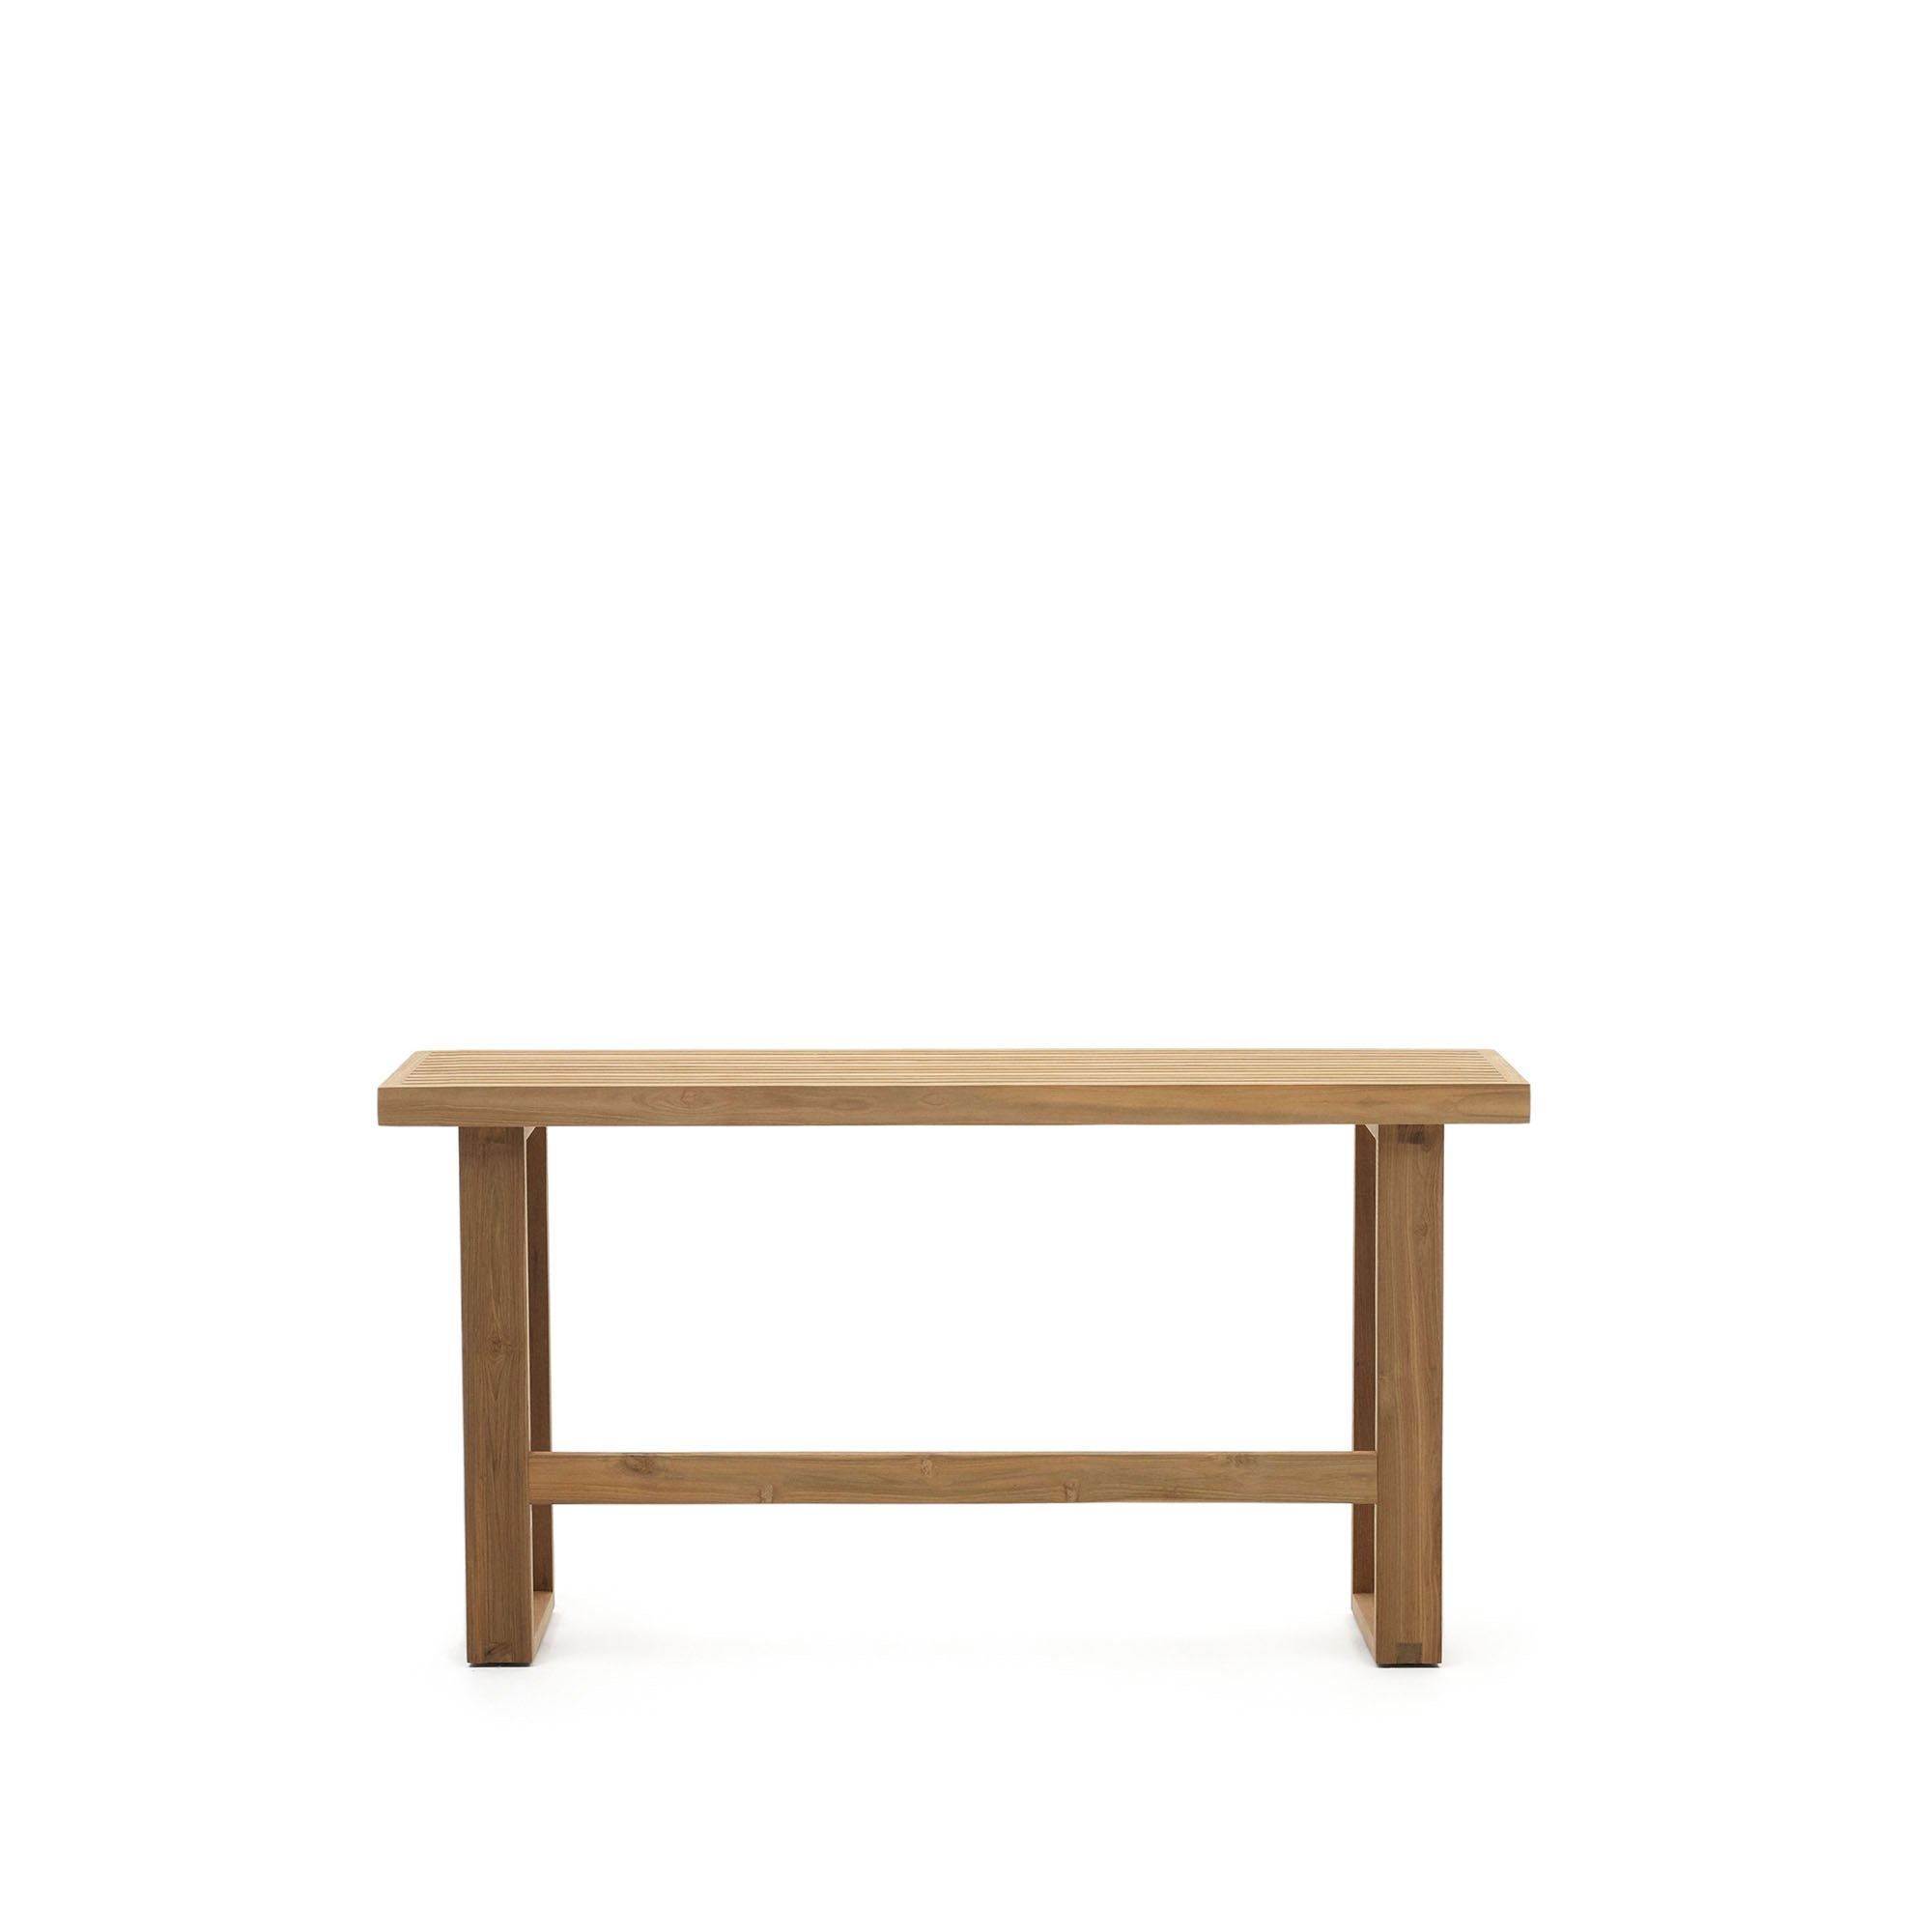 Canadell 100% outdoor solid recycled teak tall bench, 130 cm